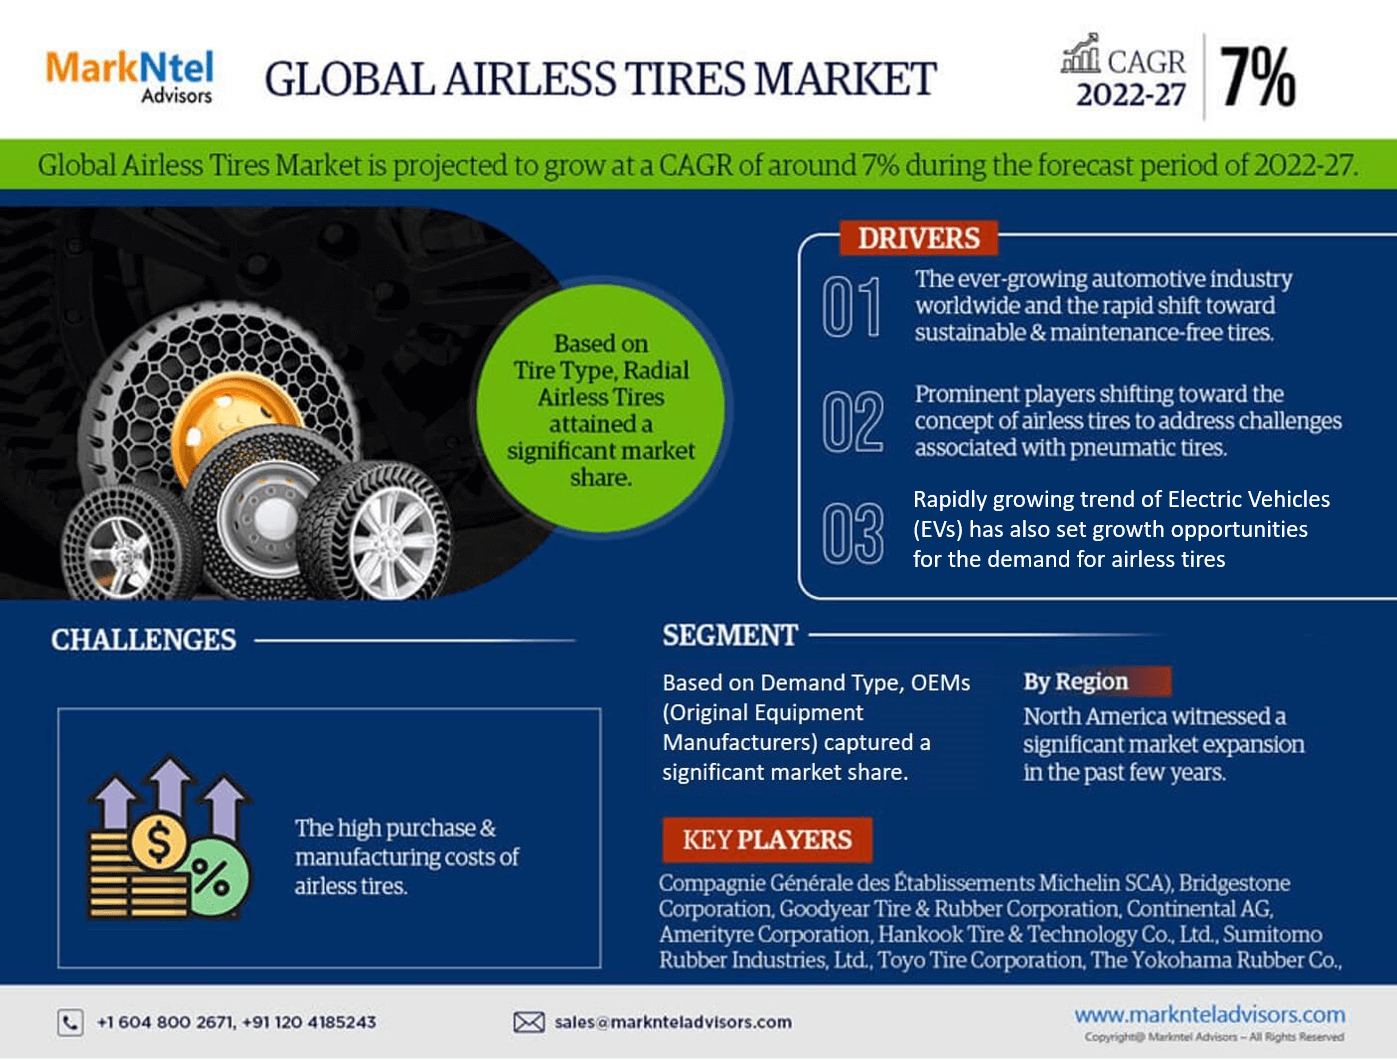 Global Airless Tire Market